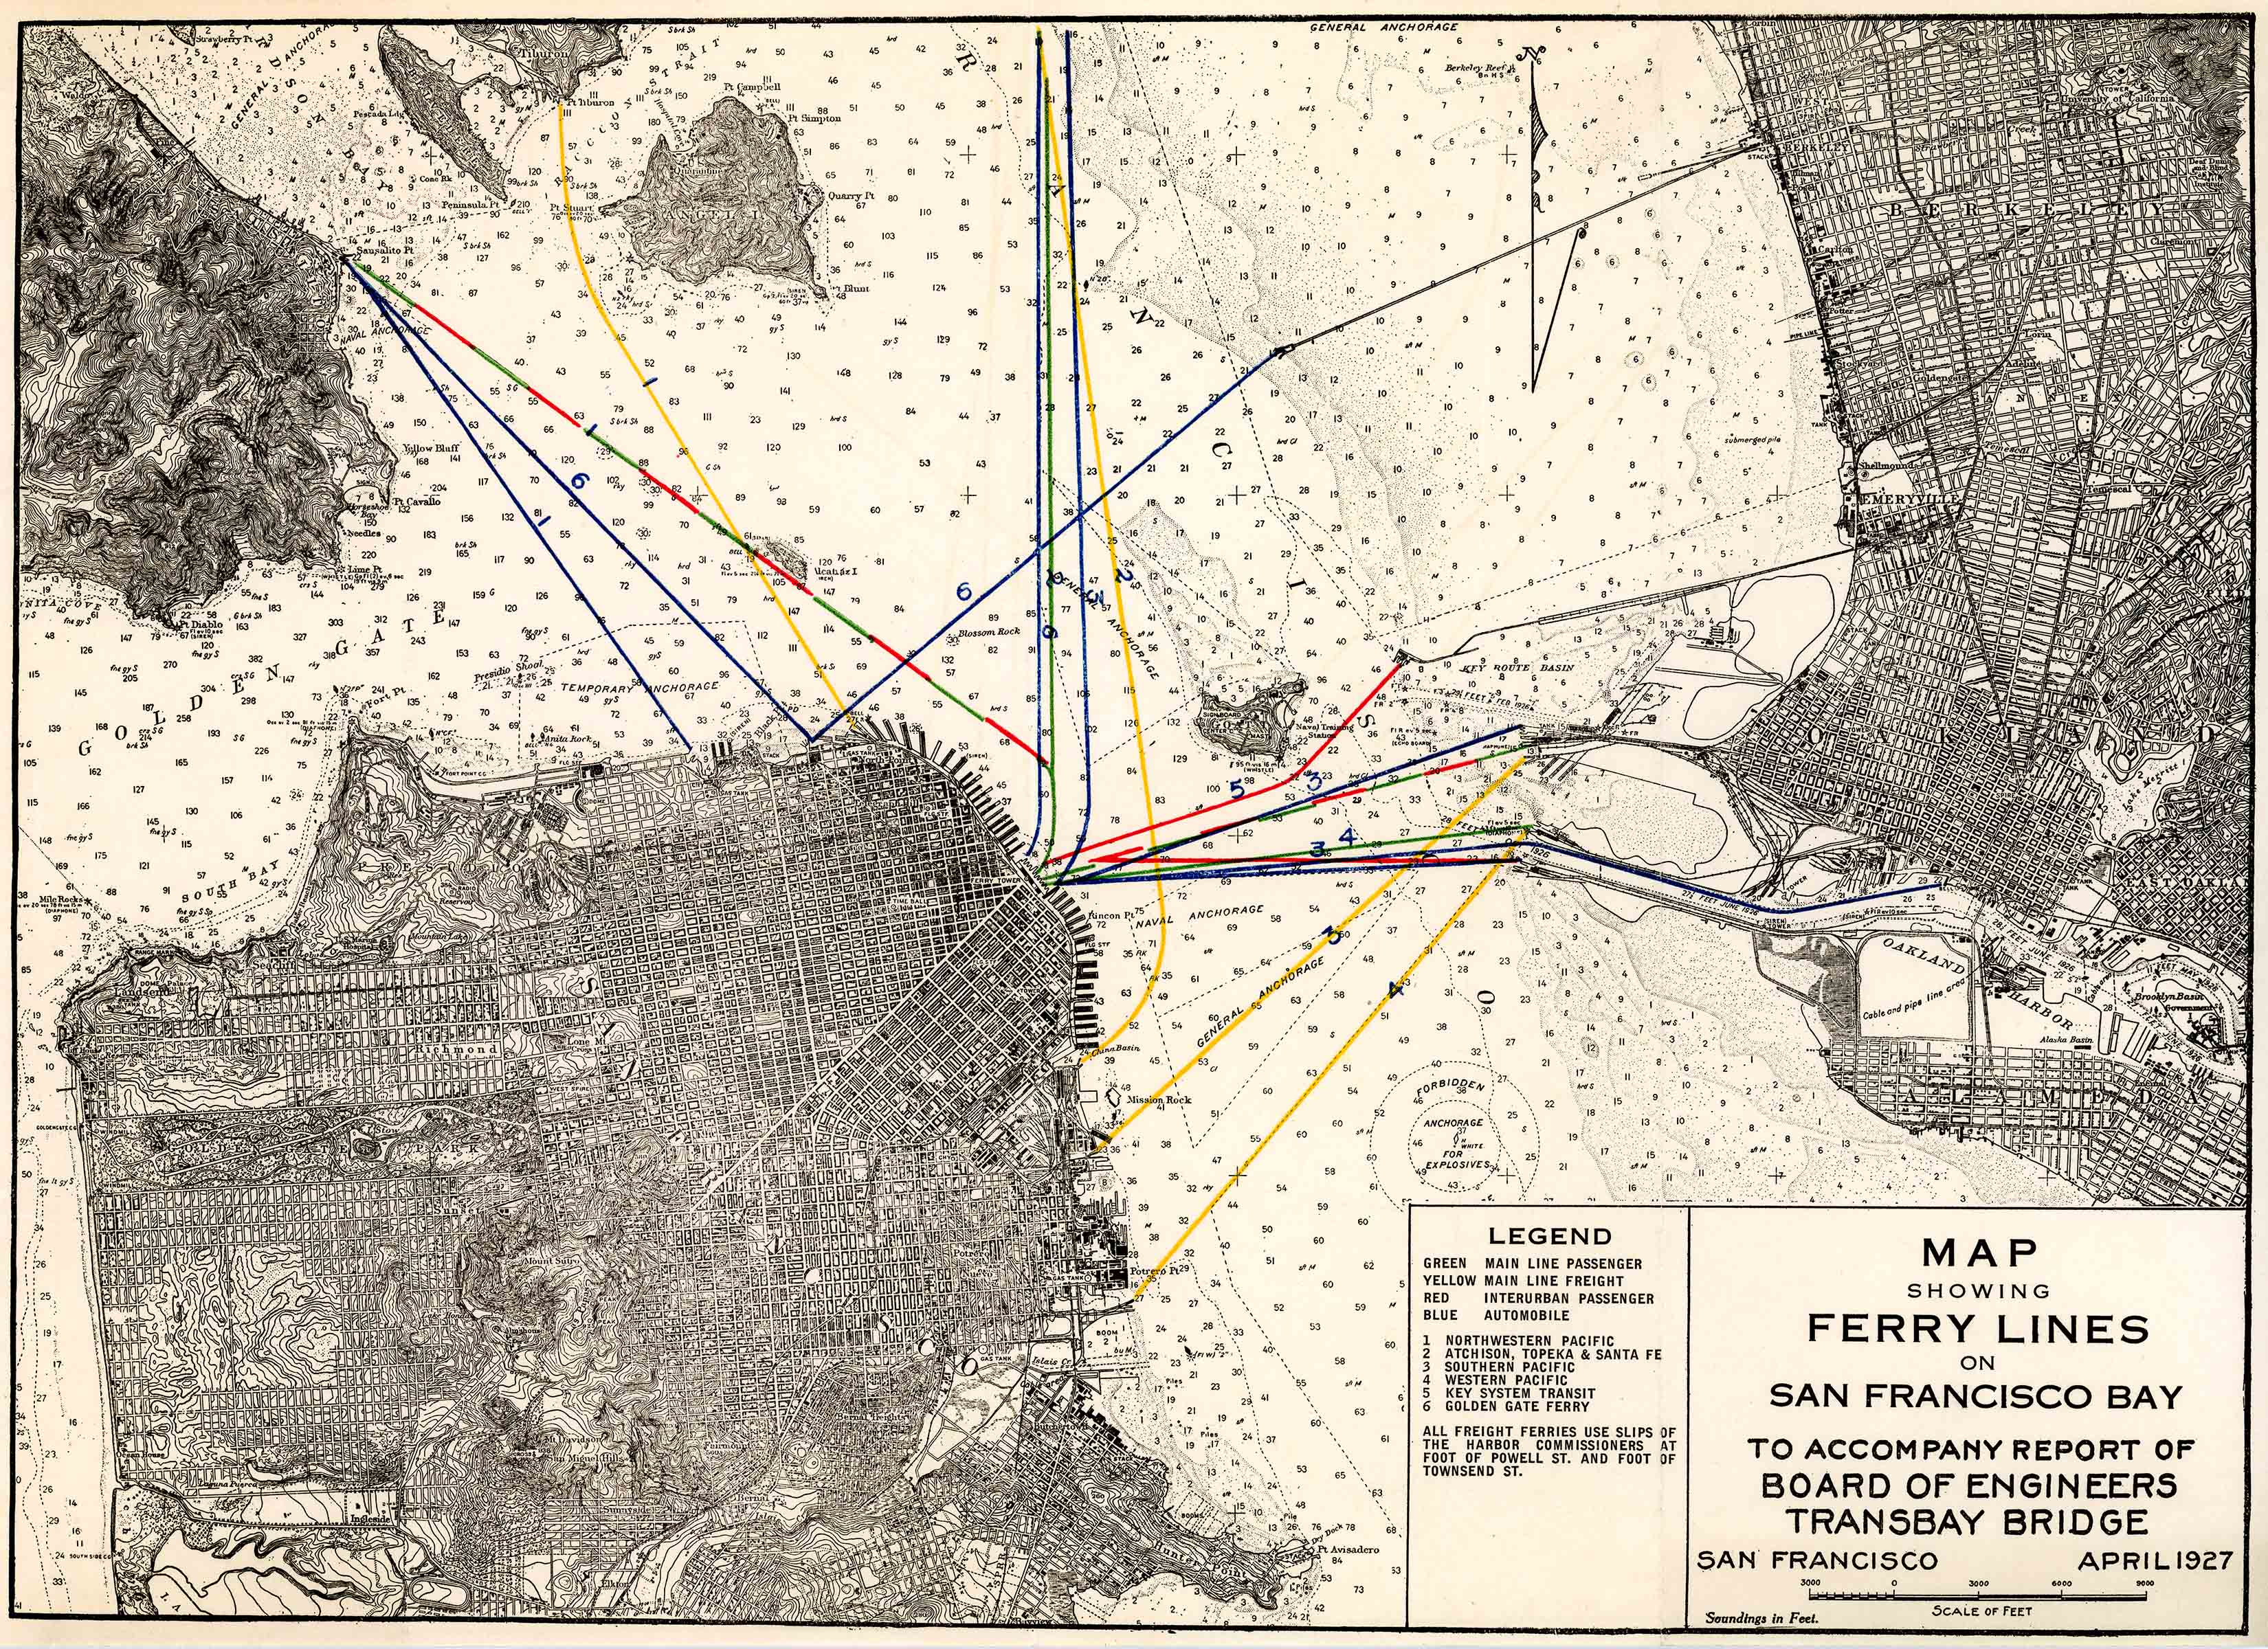 Ferry Lines on San Francisco Bay